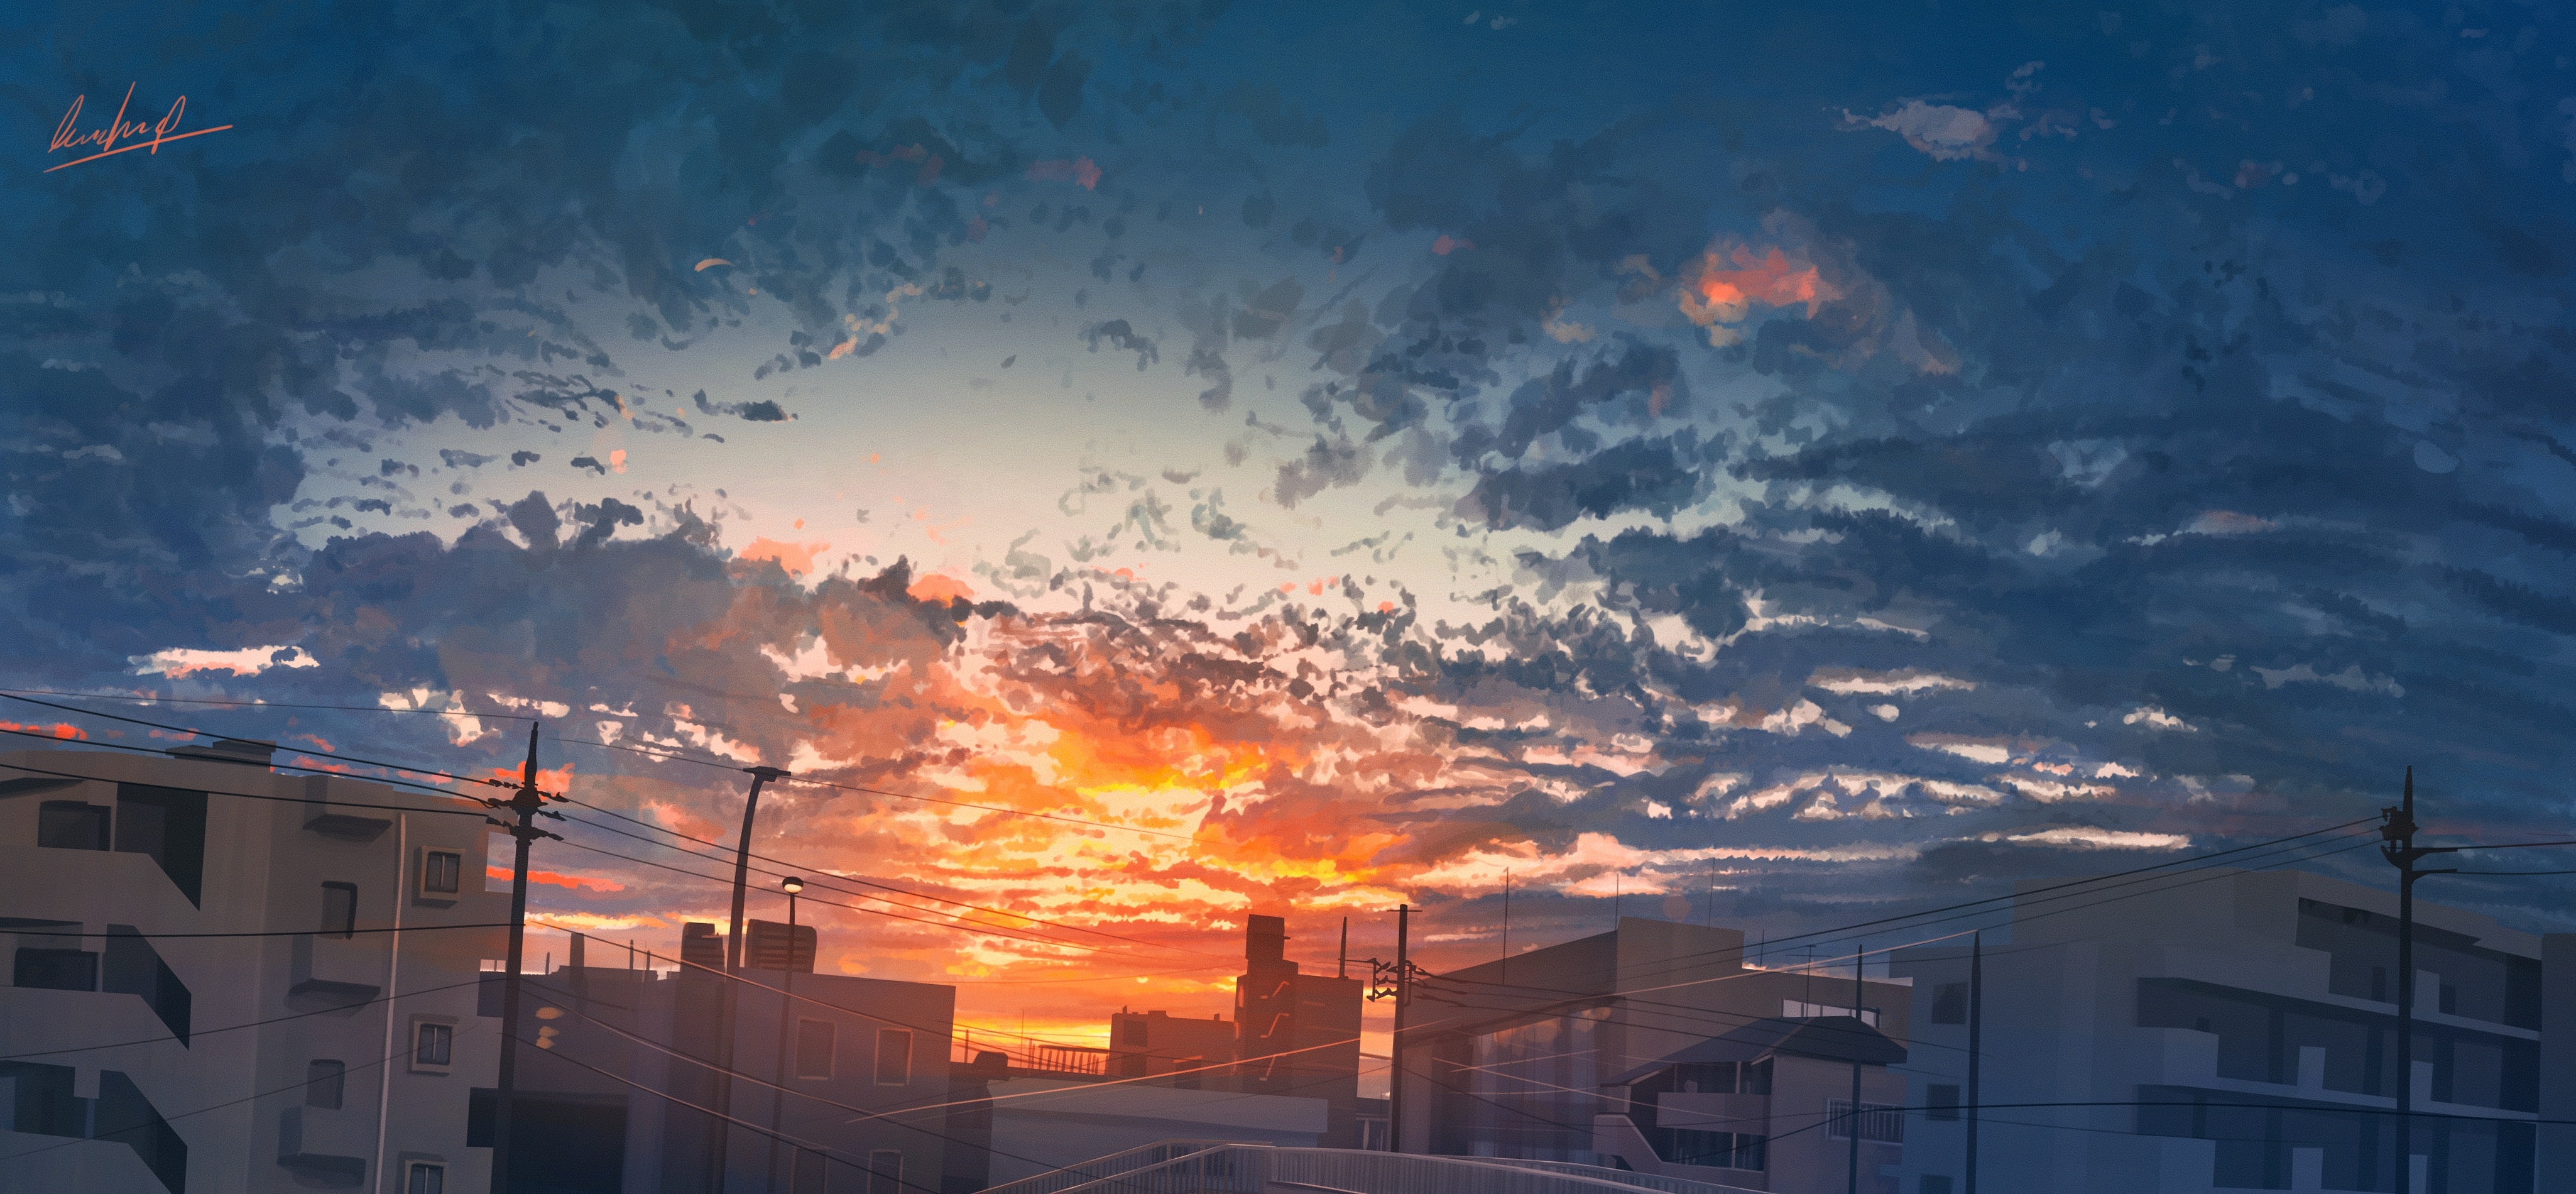 Download 1920x1080 Anime City, Sunset, Buildings, Clouds, Dawn, Scenic Wallpaper for Widescreen